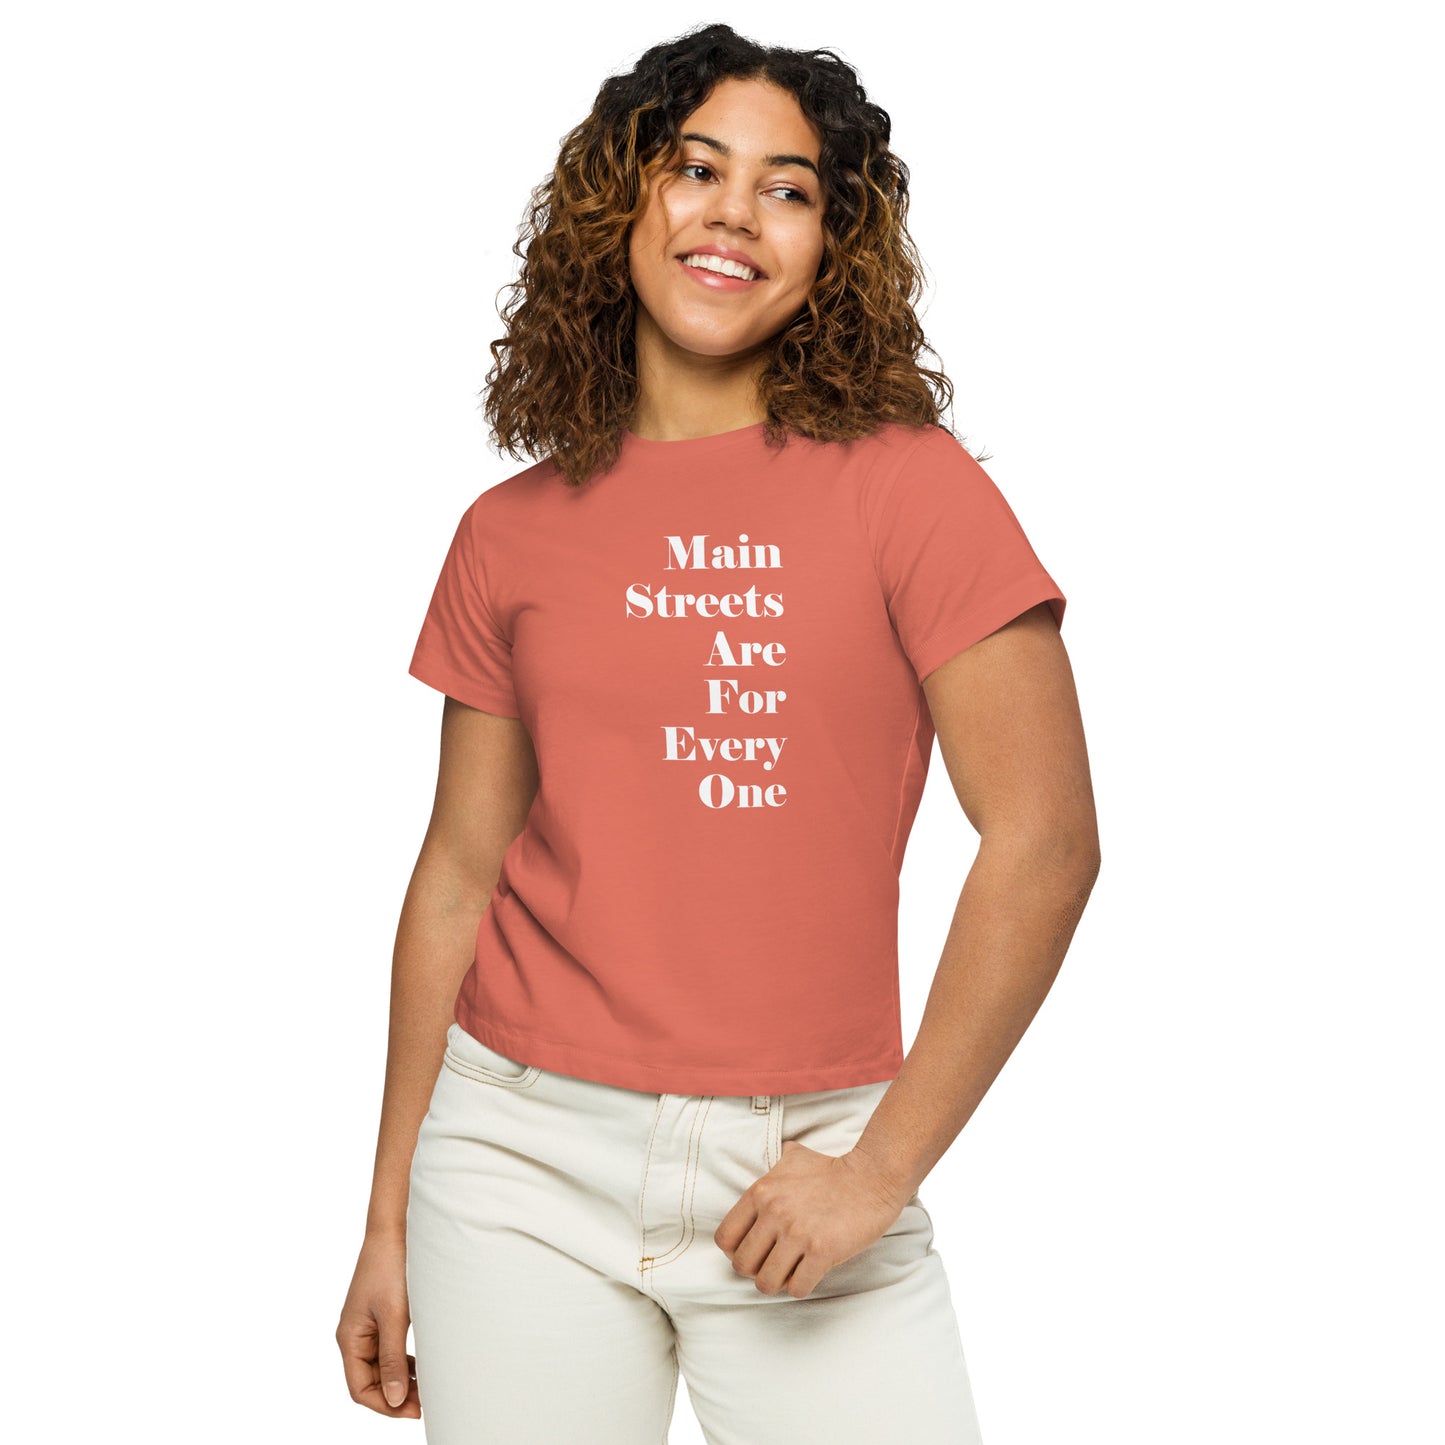 Main Streets Are For Everyone (White) Women’s High-Waisted T-shirt